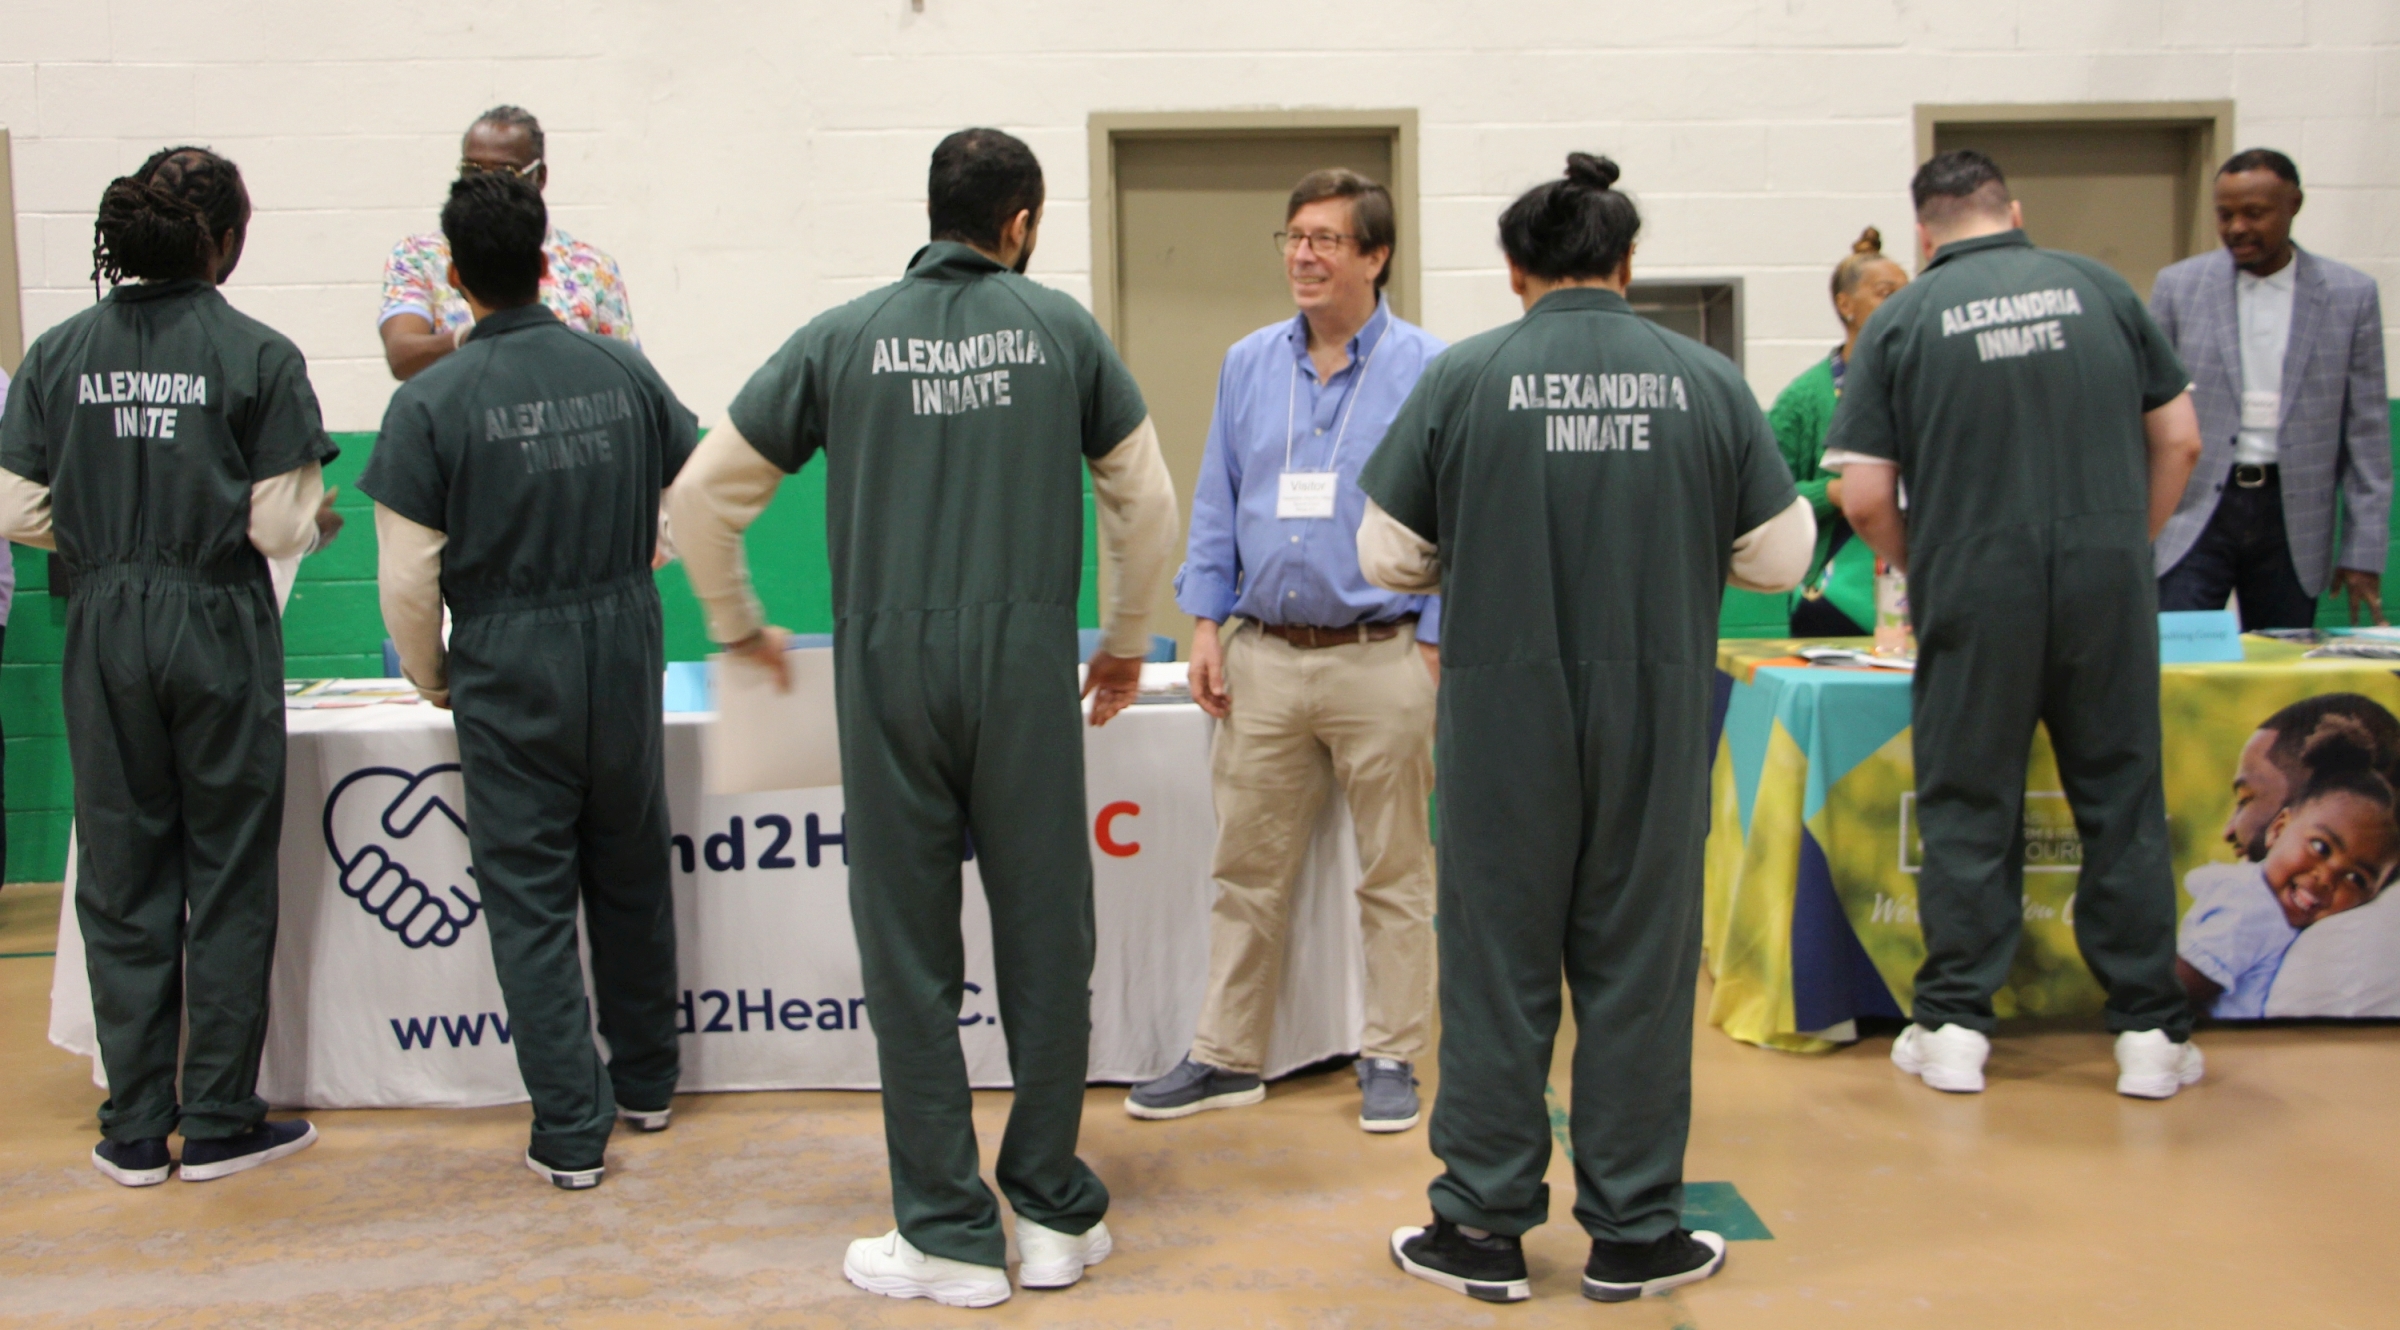 Five inmates in green jumpsuits speaking with four individuals from two diferent organizations and looking at information at exhibition tables